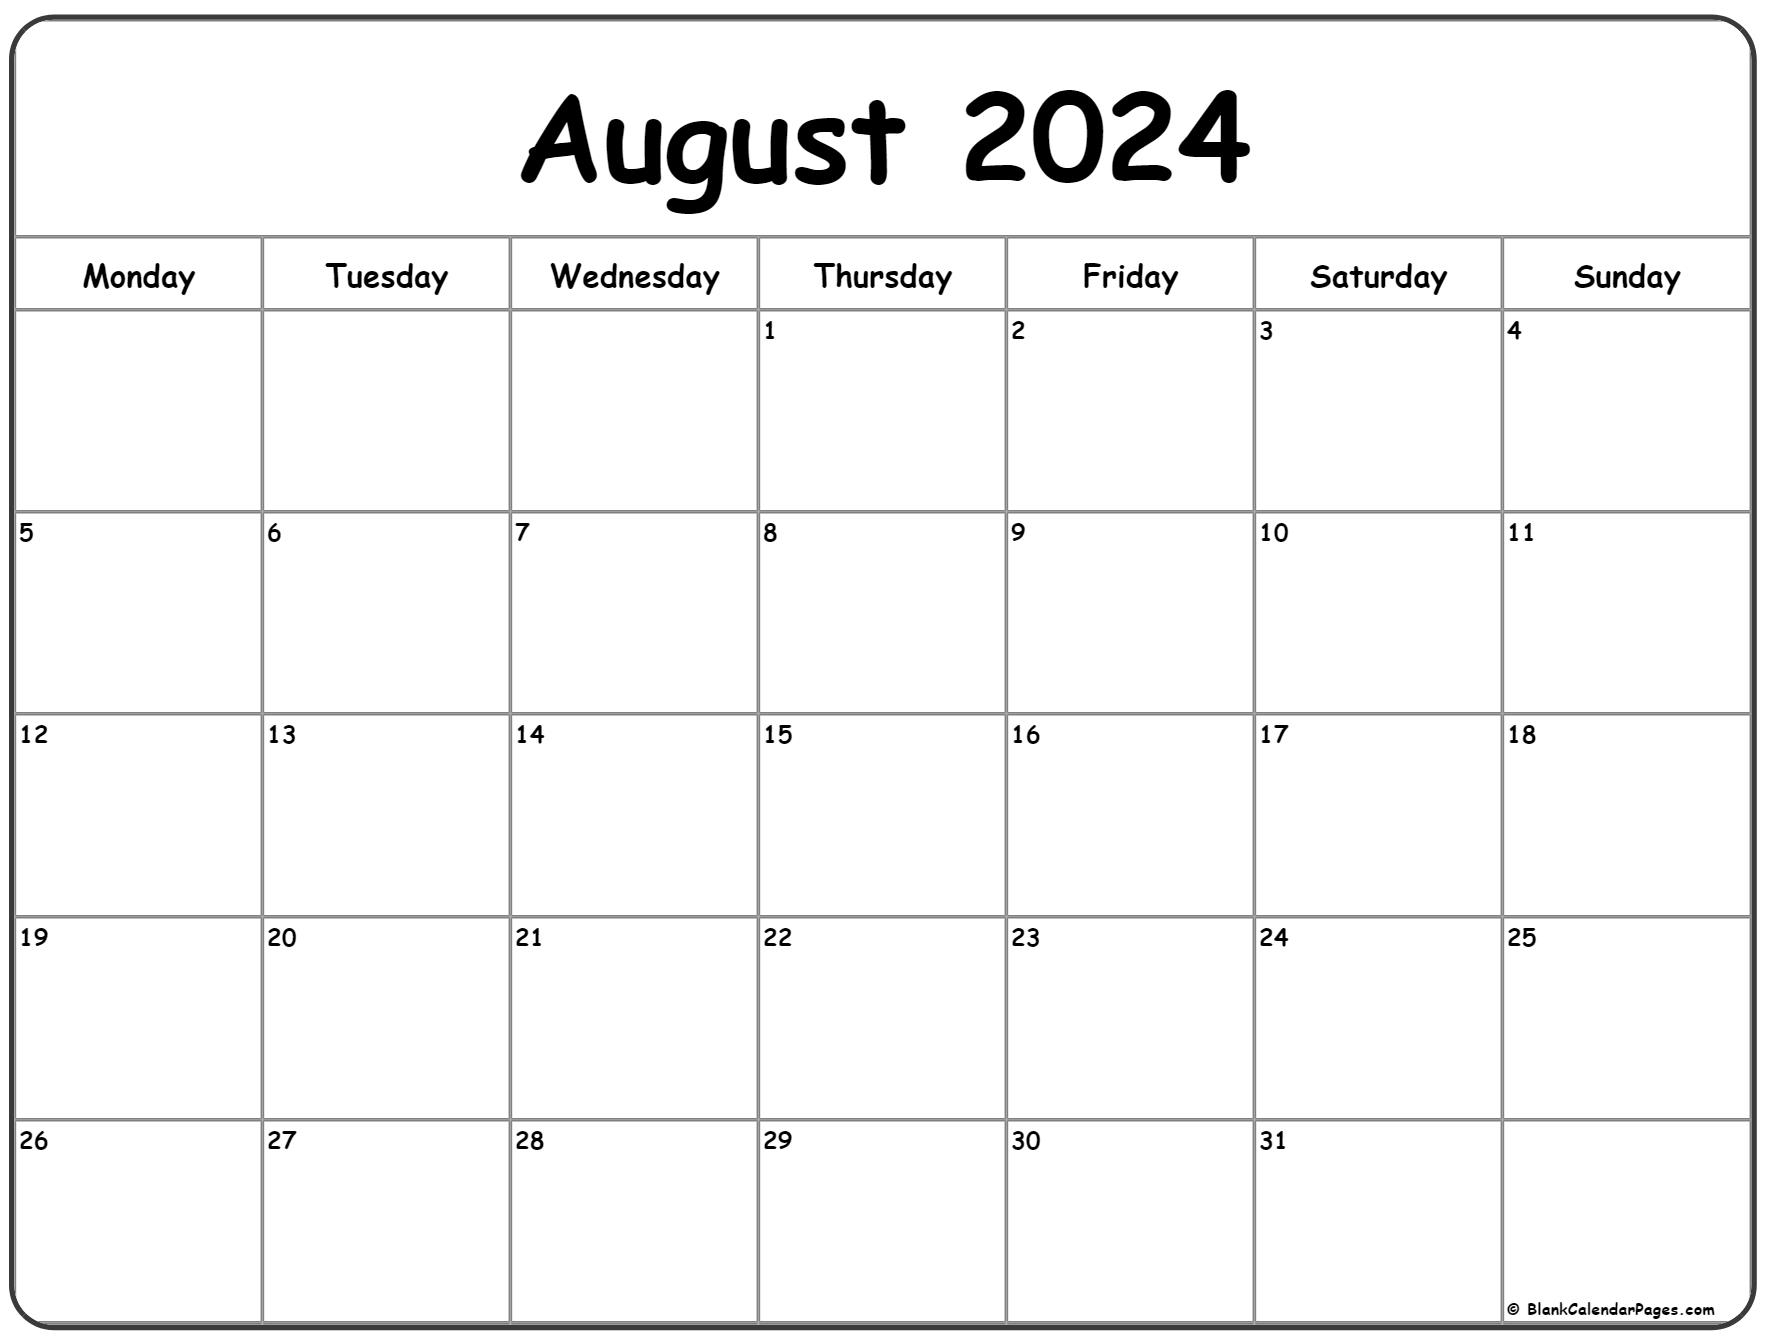 August 2024 Monday Calendar | Monday To Sunday for Printable Monthly Calendar August 2024